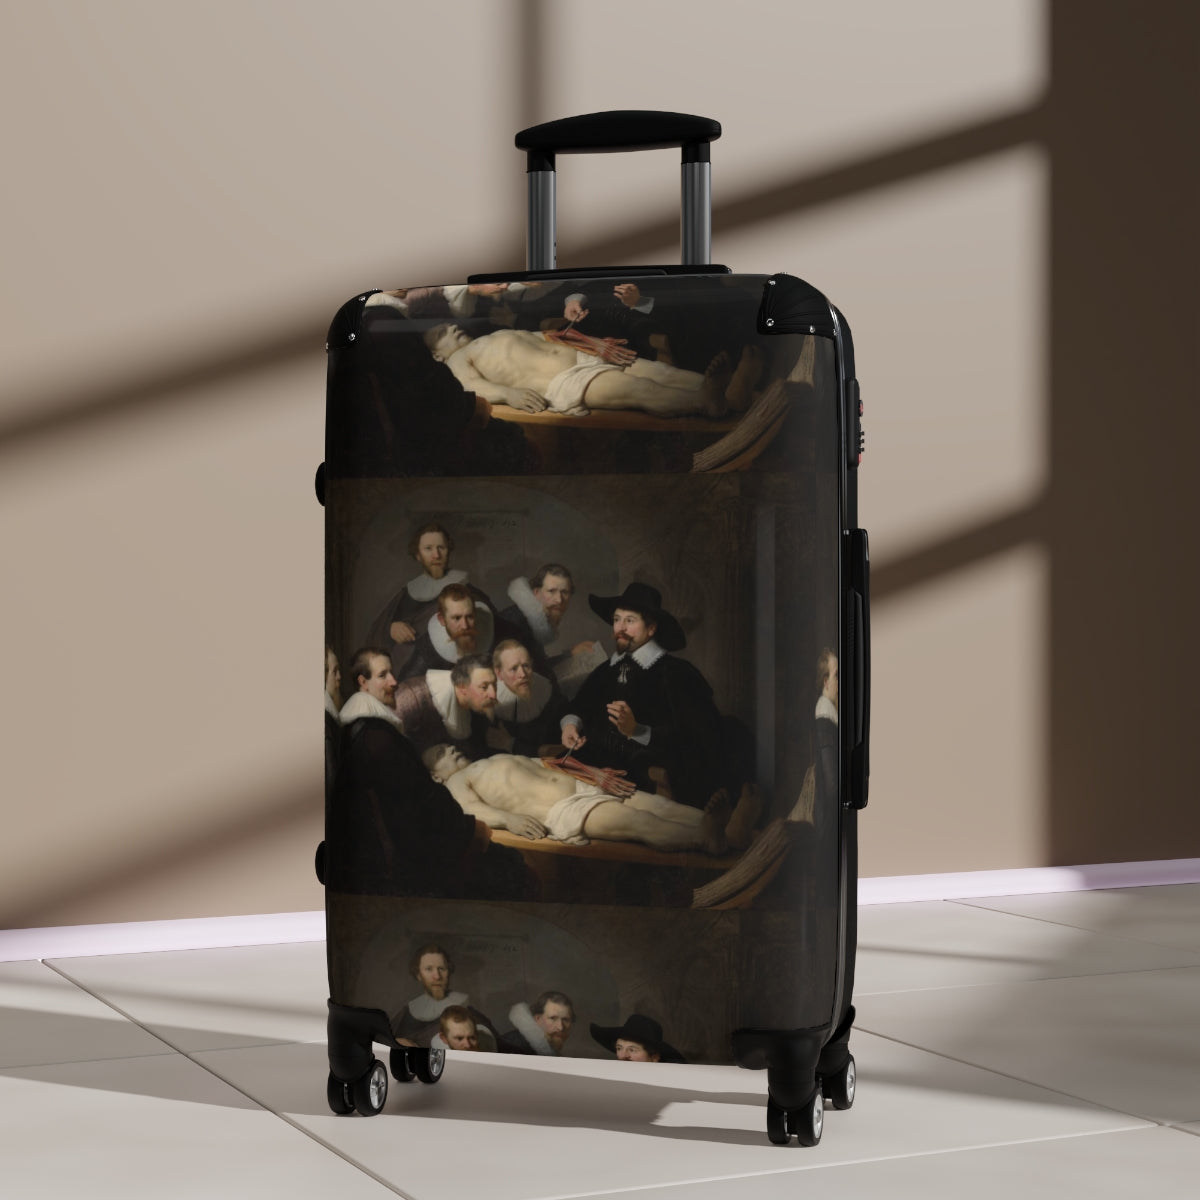 Getrott The Anatomy Lesson of Dr. Nicolaes Tulp by Rembrandt Black Cabin Suitcase Inner Pockets Extended Storage Adjustable Telescopic Handle Inner Pockets Double wheeled Polycarbonate Hard-shell Built-in Lock